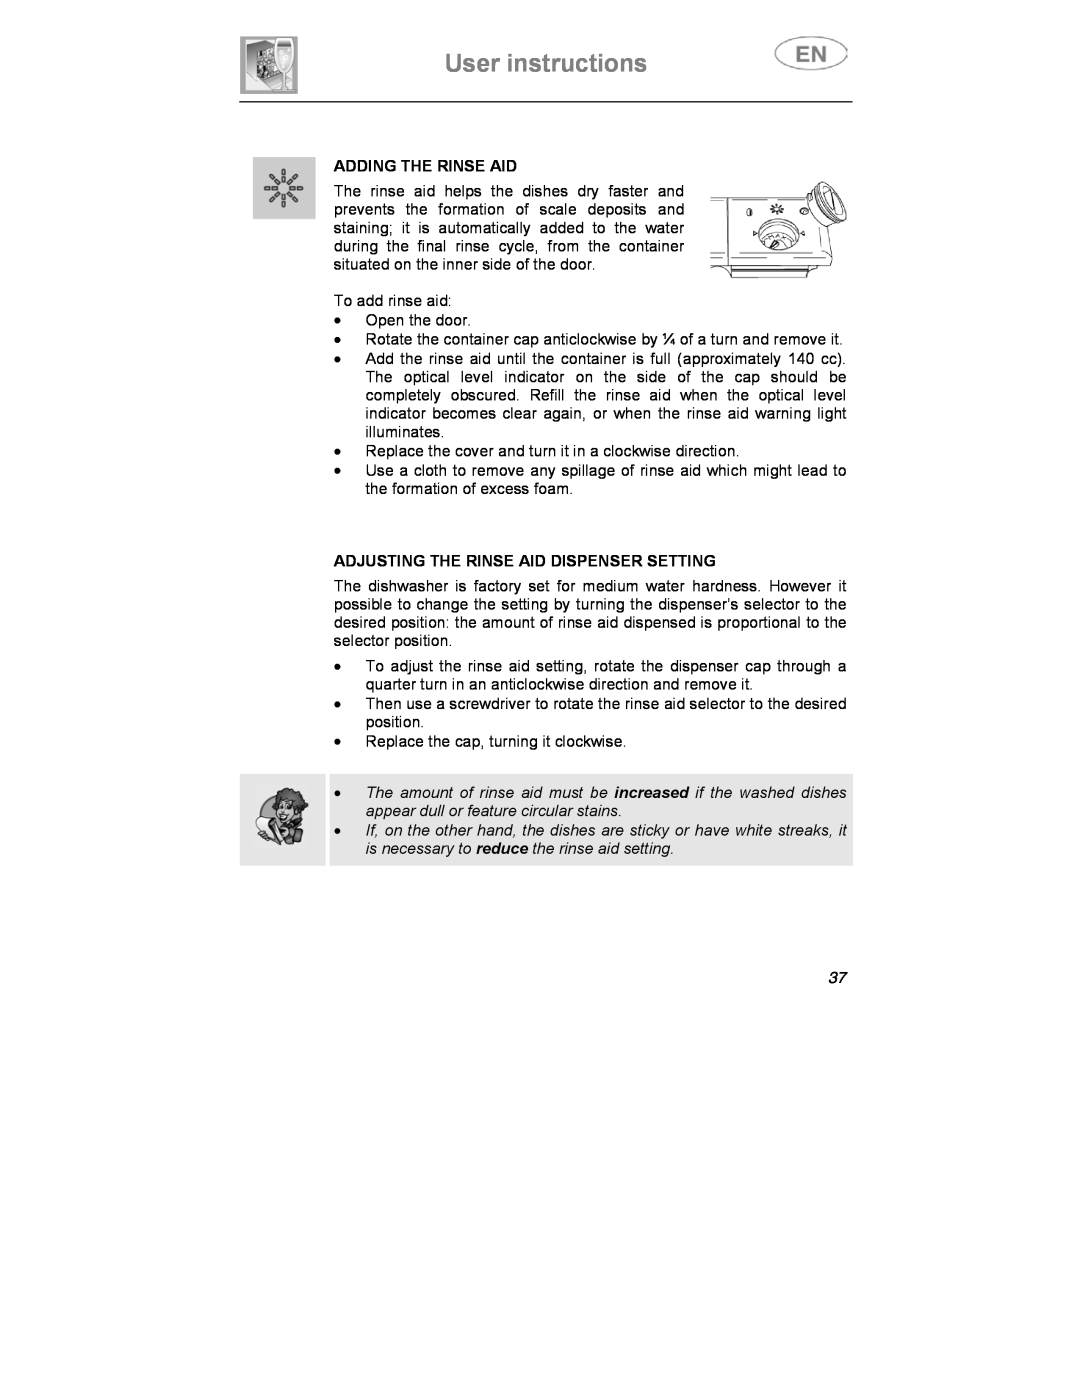 Smeg CA01-3 instruction manual User instructions, Adding The Rinse Aid, Adjusting The Rinse Aid Dispenser Setting 